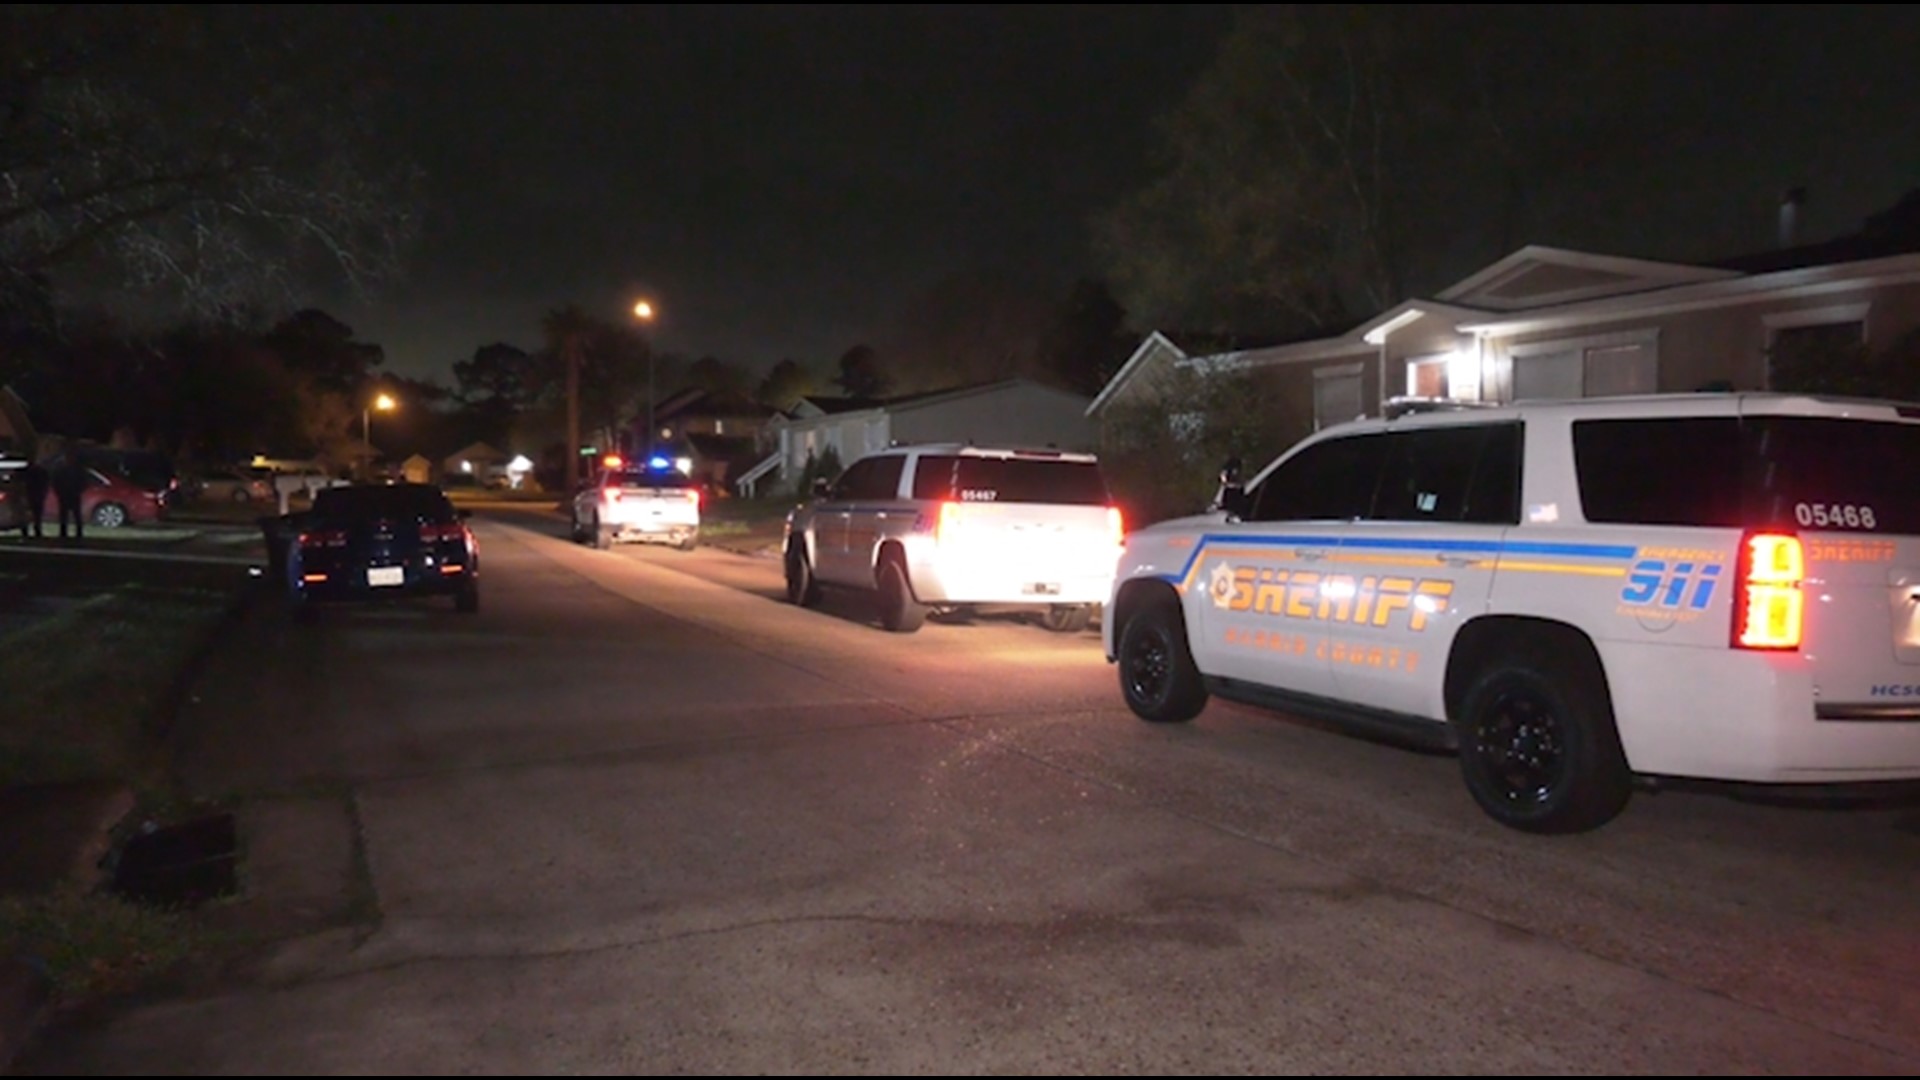 According to preliminary reports, a boy, who's believed to be about 15, was injured in a drive-by shooting in the 11900 block of Greenrock Lane.